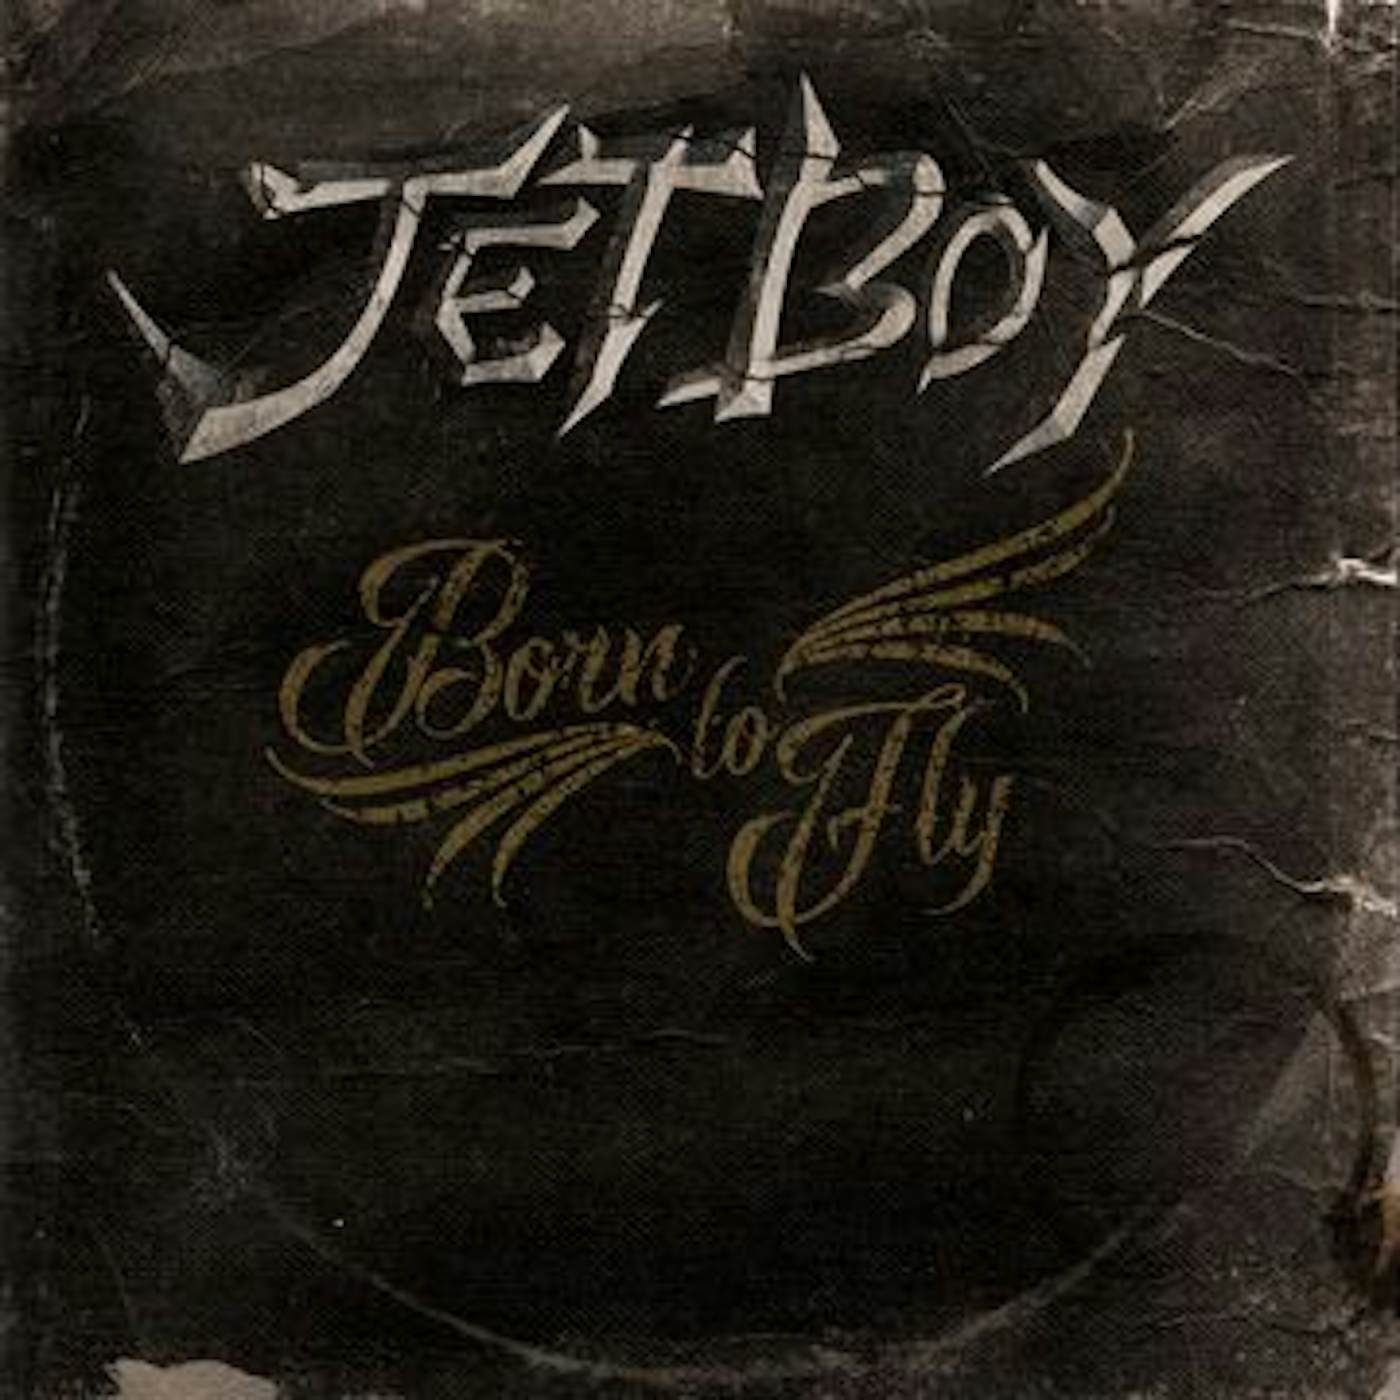 Jetboy Born To Fly CD